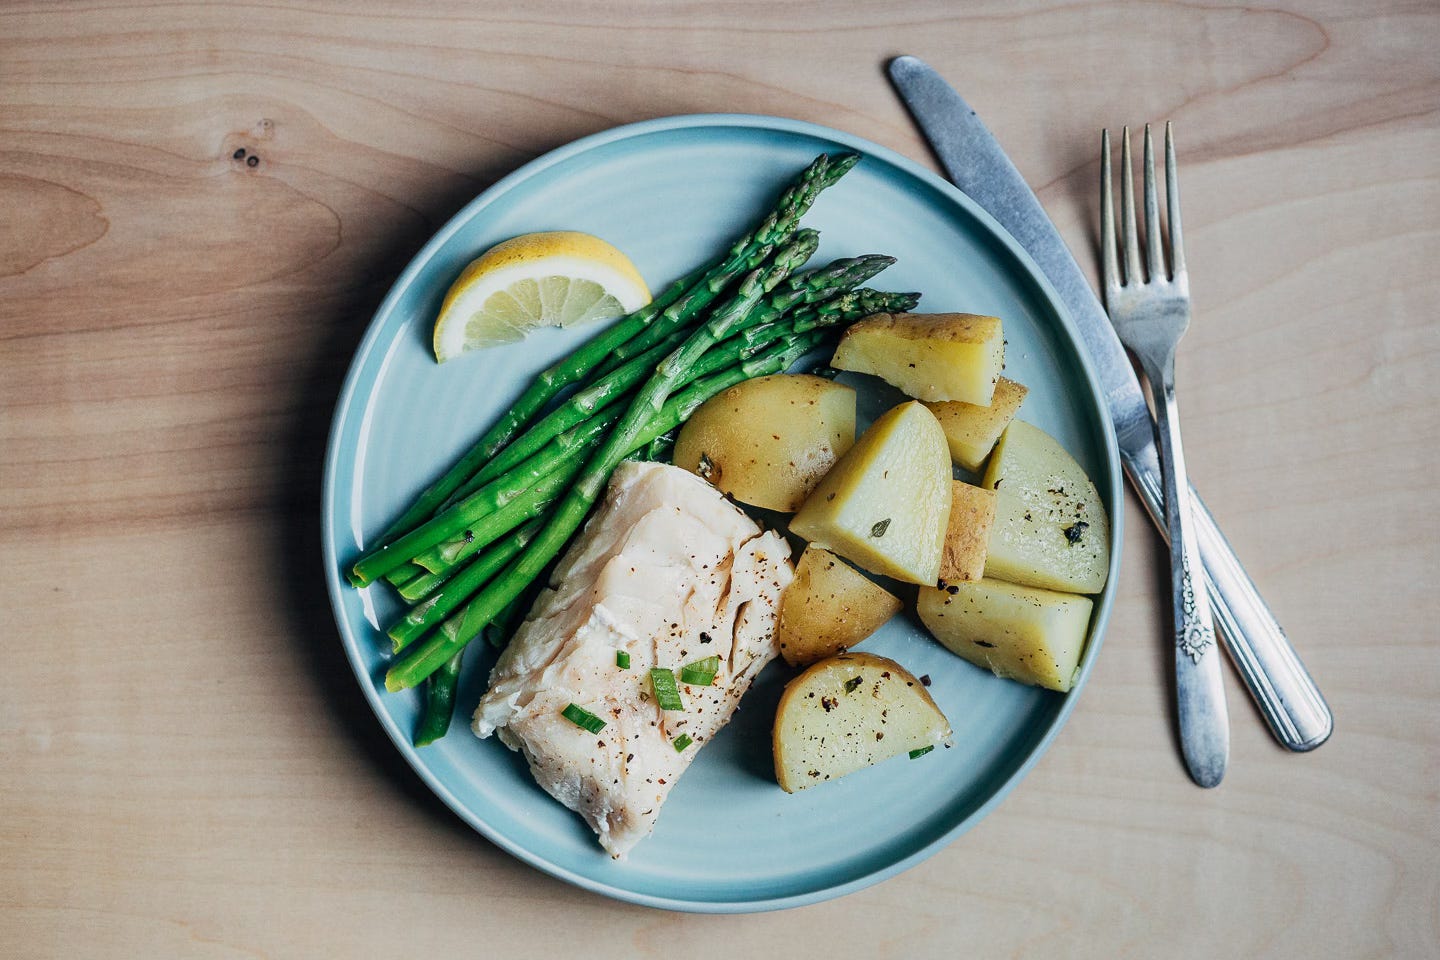 A plate with cod, asparagus, and potatoes